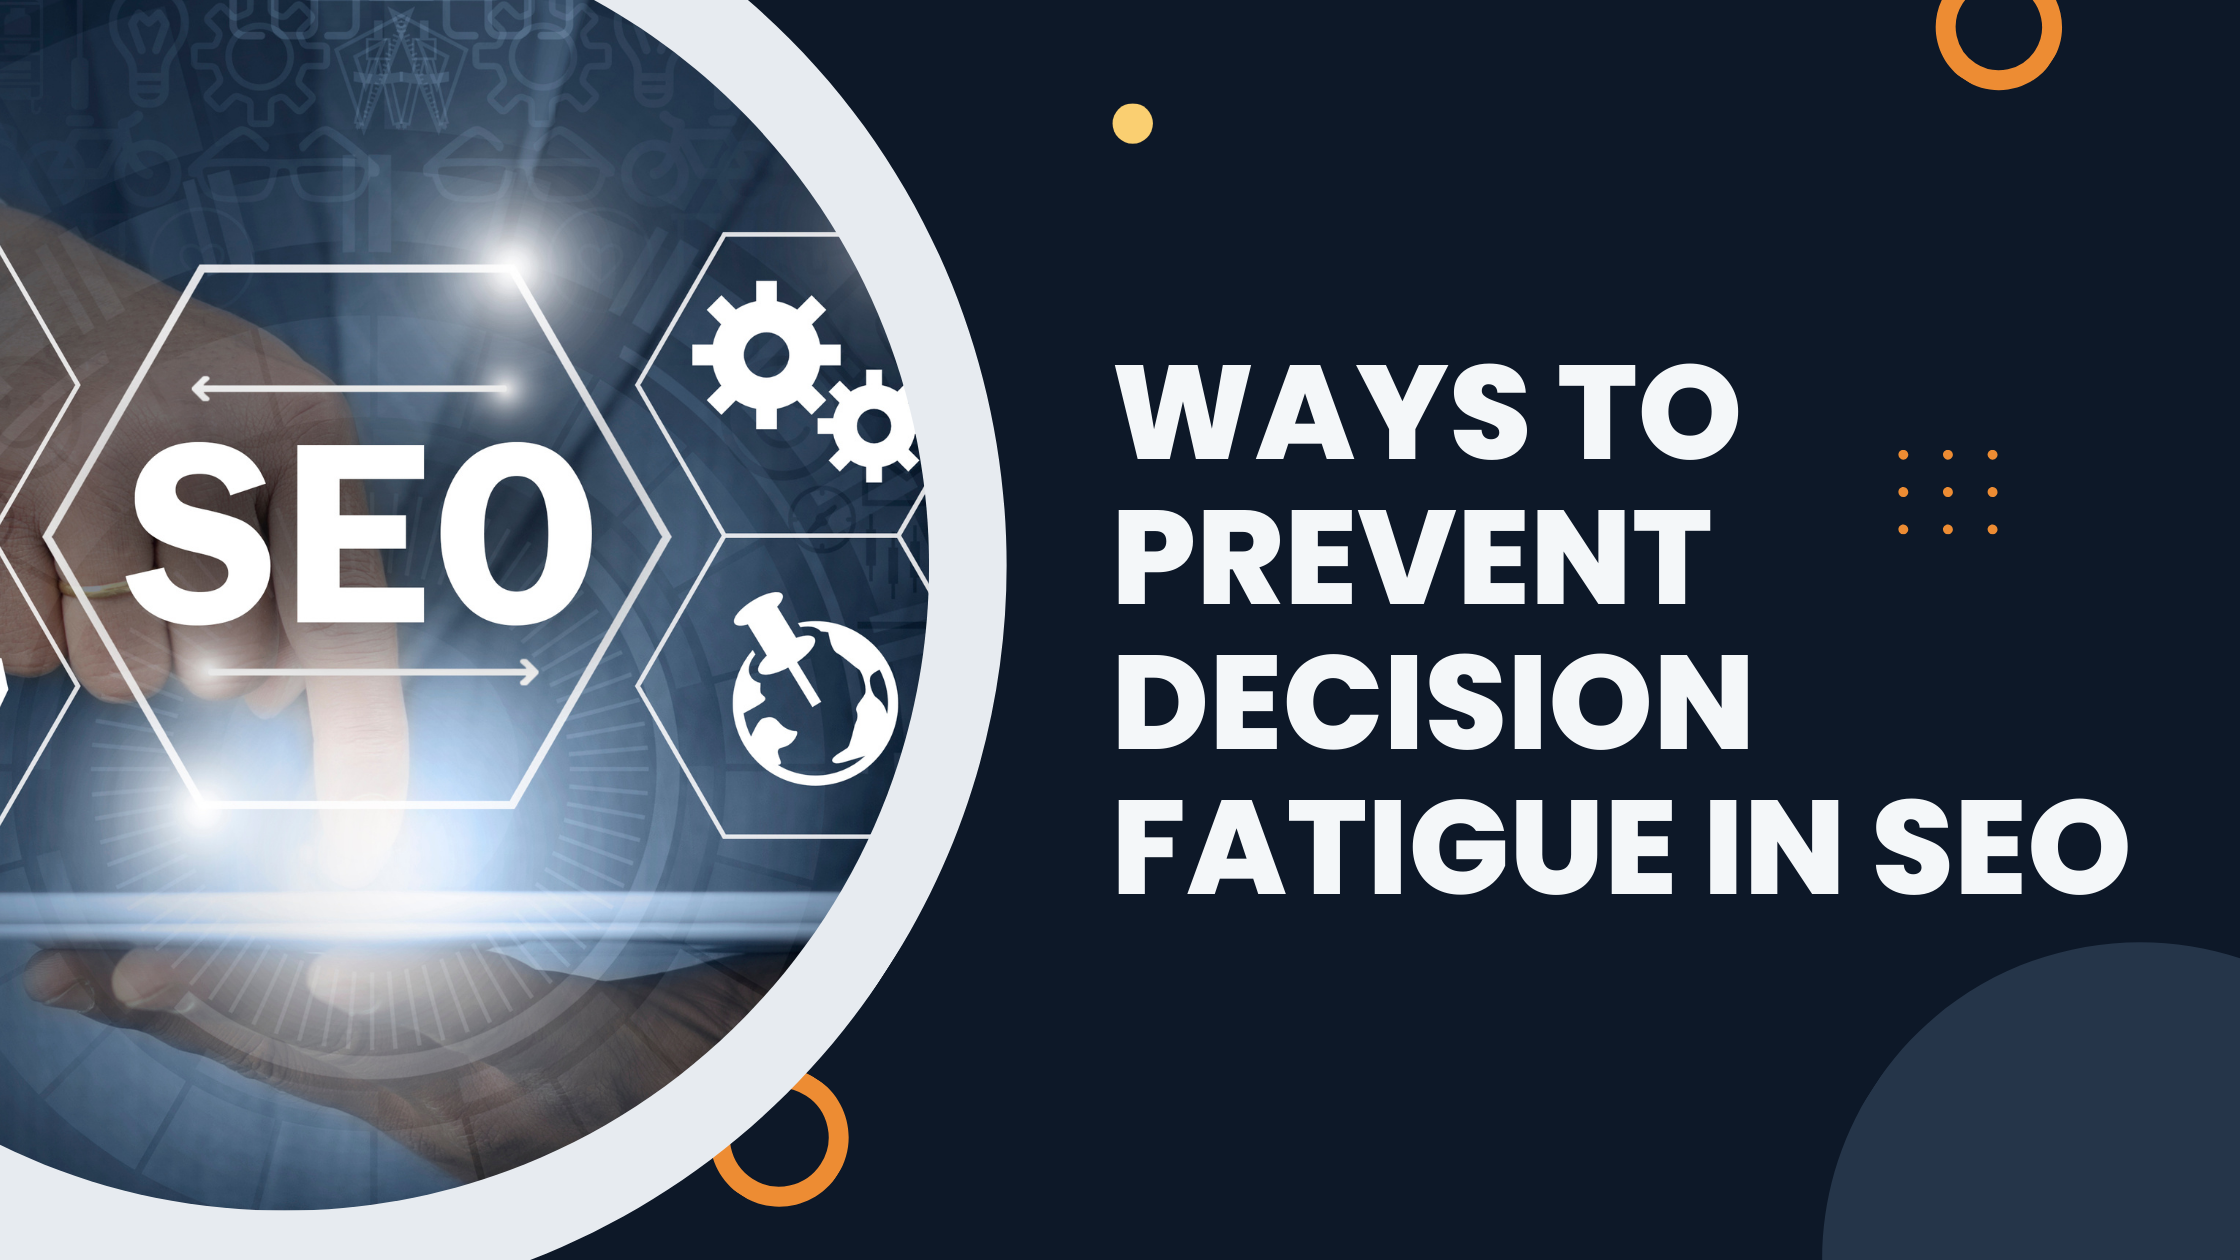 Ways to Prevent Decision Fatigue in SEO